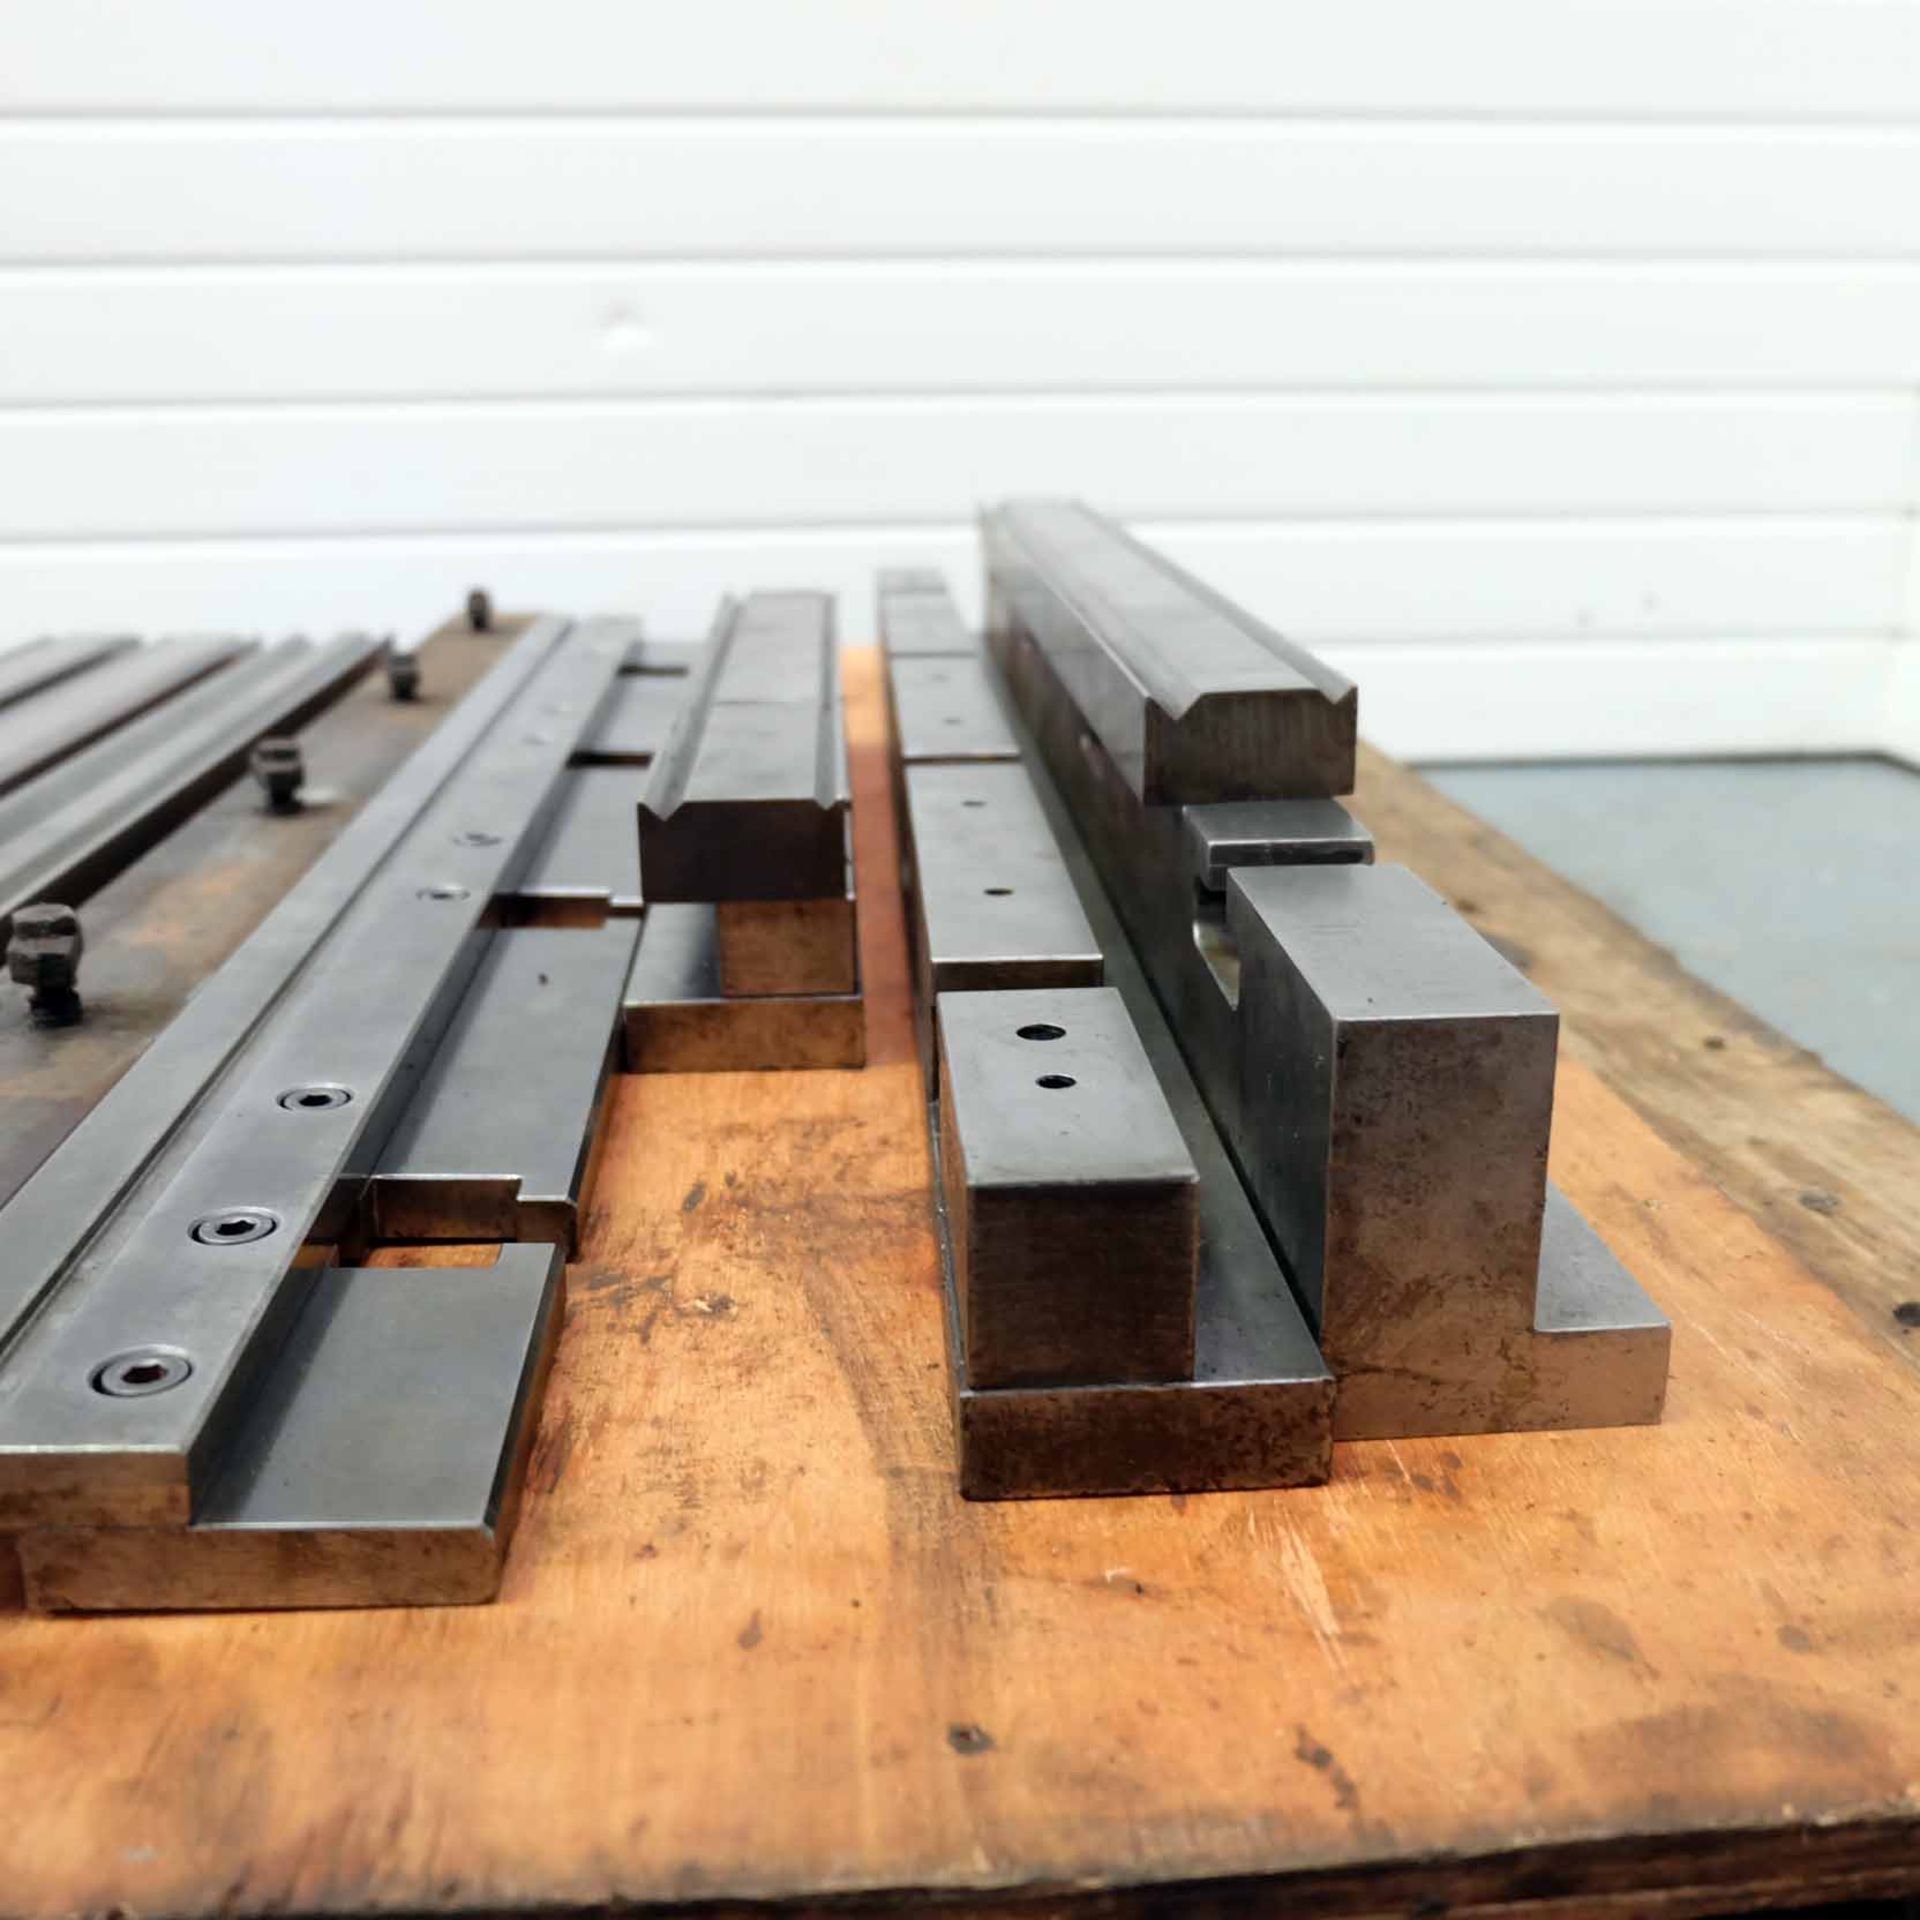 Quantity of Bottom Press Brake Tooling. Clamp Bases, Clamps & Double Vee Tools. - Image 4 of 6